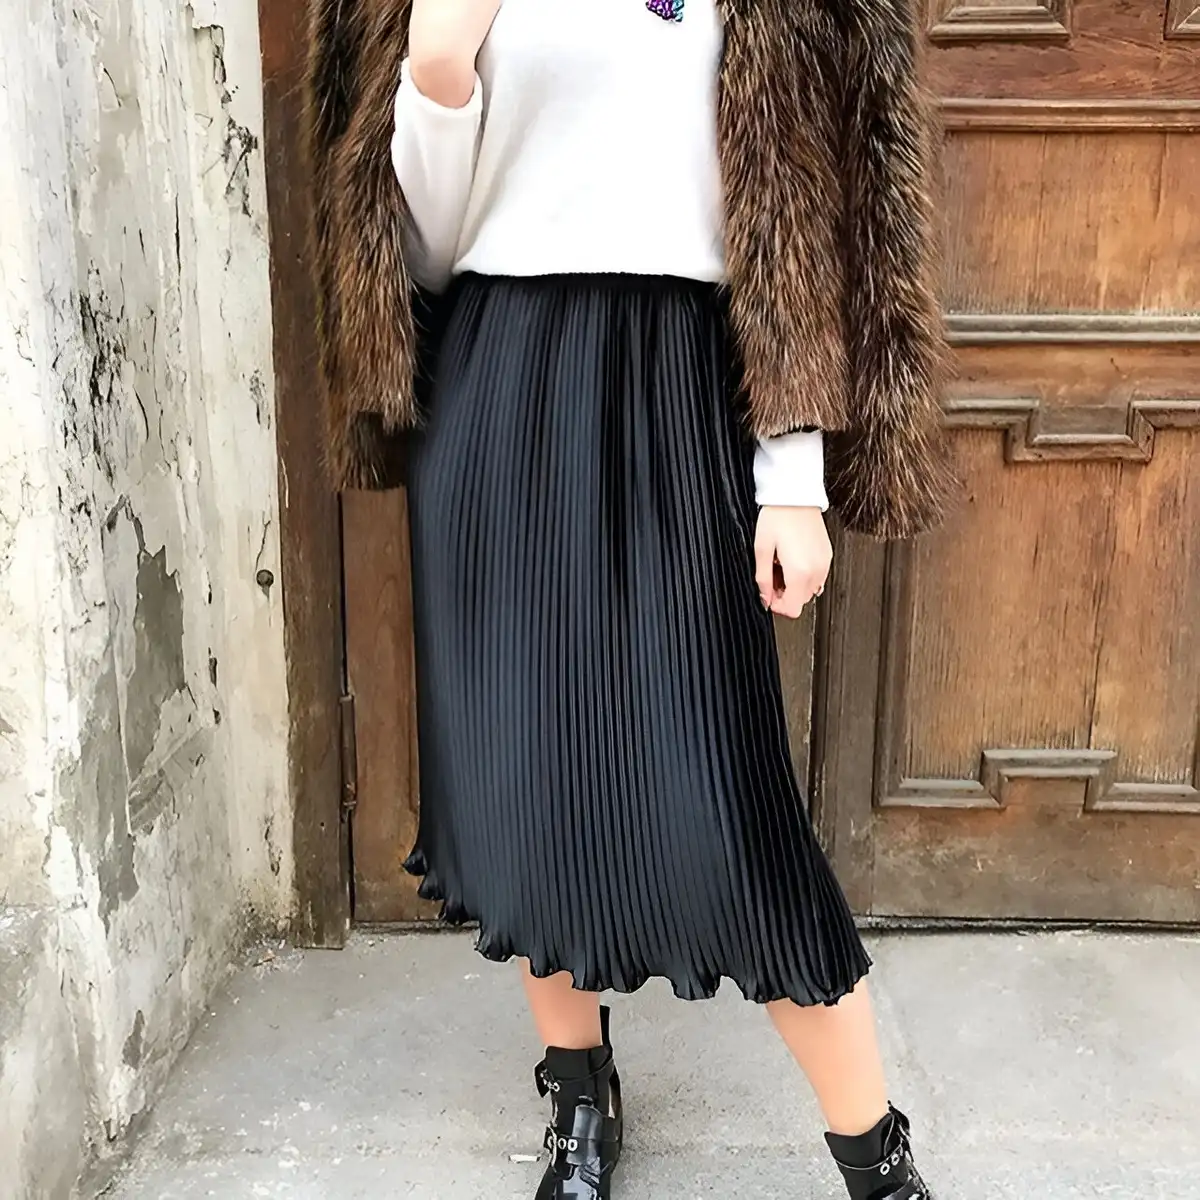 midi black skirt paired with cream sweater and fur coat